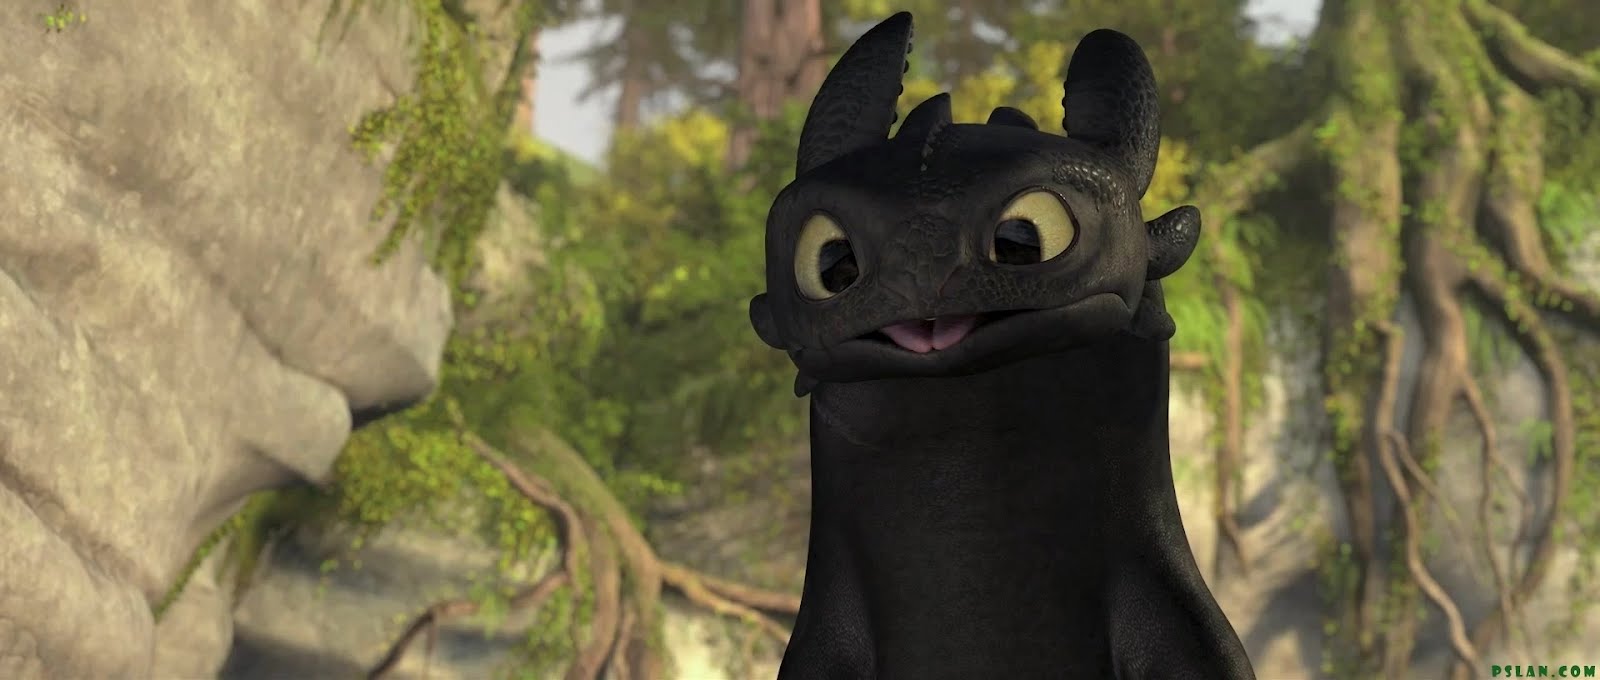 Toothless-how-to-train-your-dragon-DWA.j